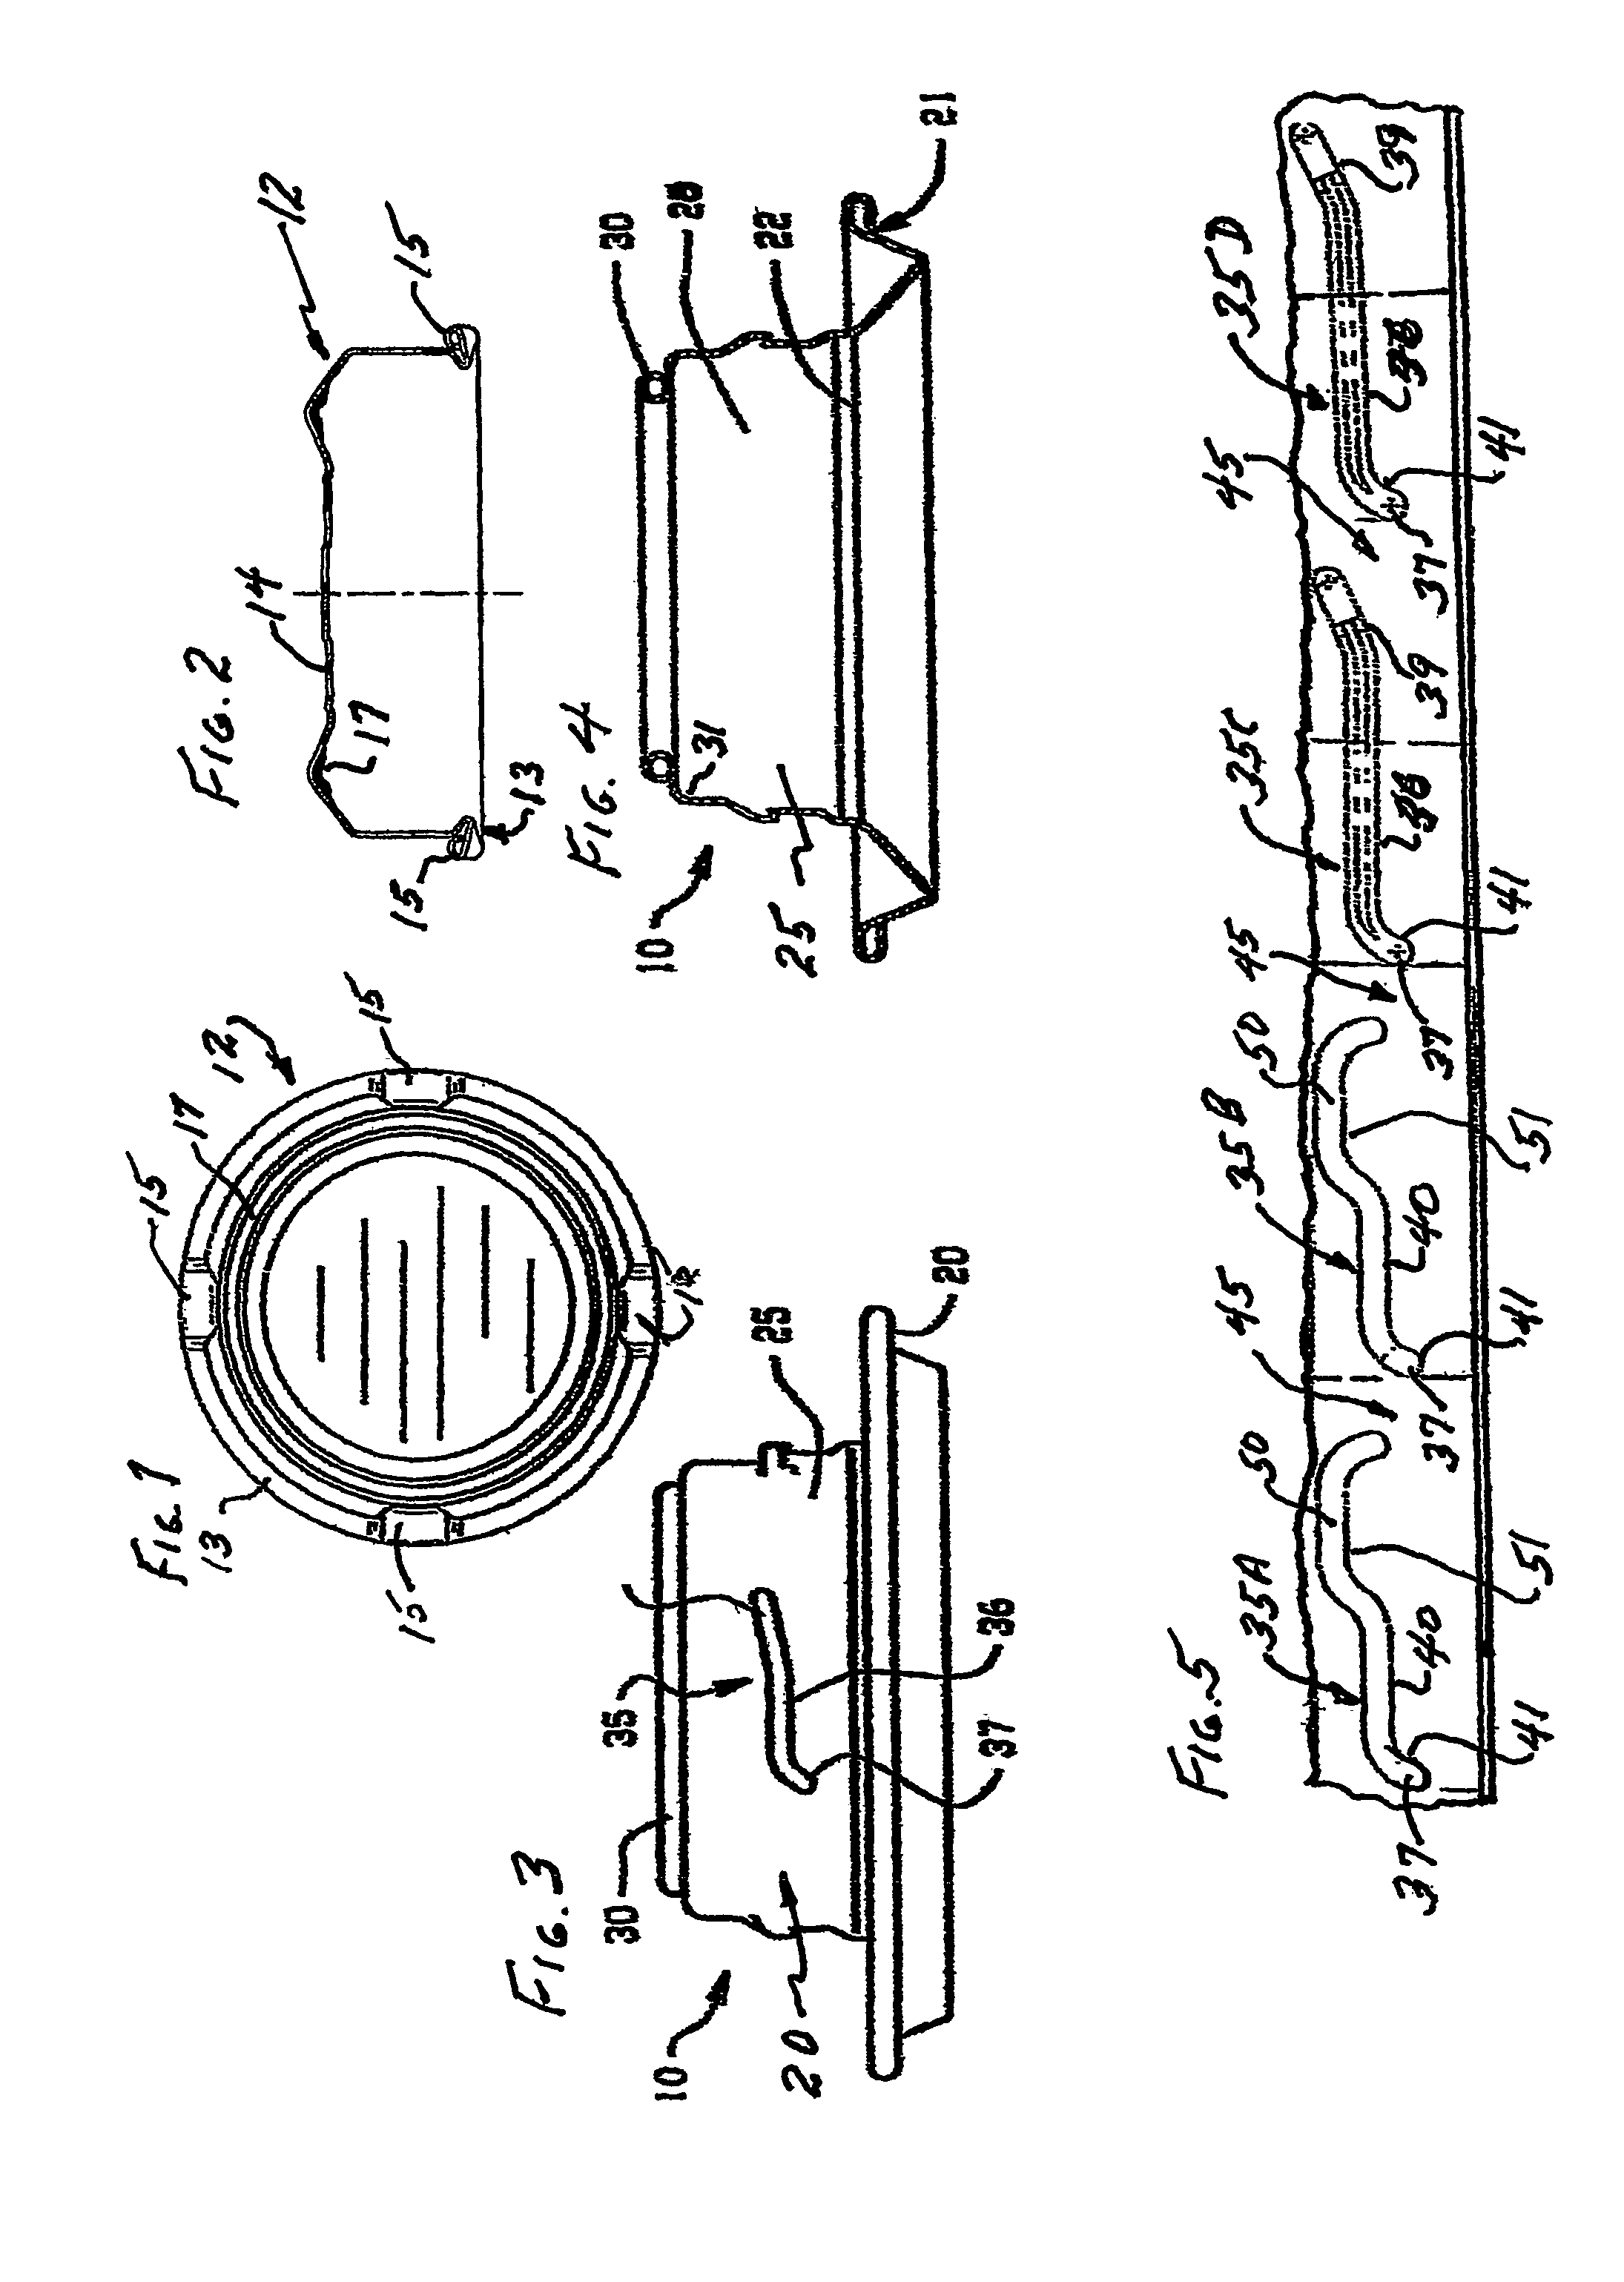 Container and removable closure cap with venting feature